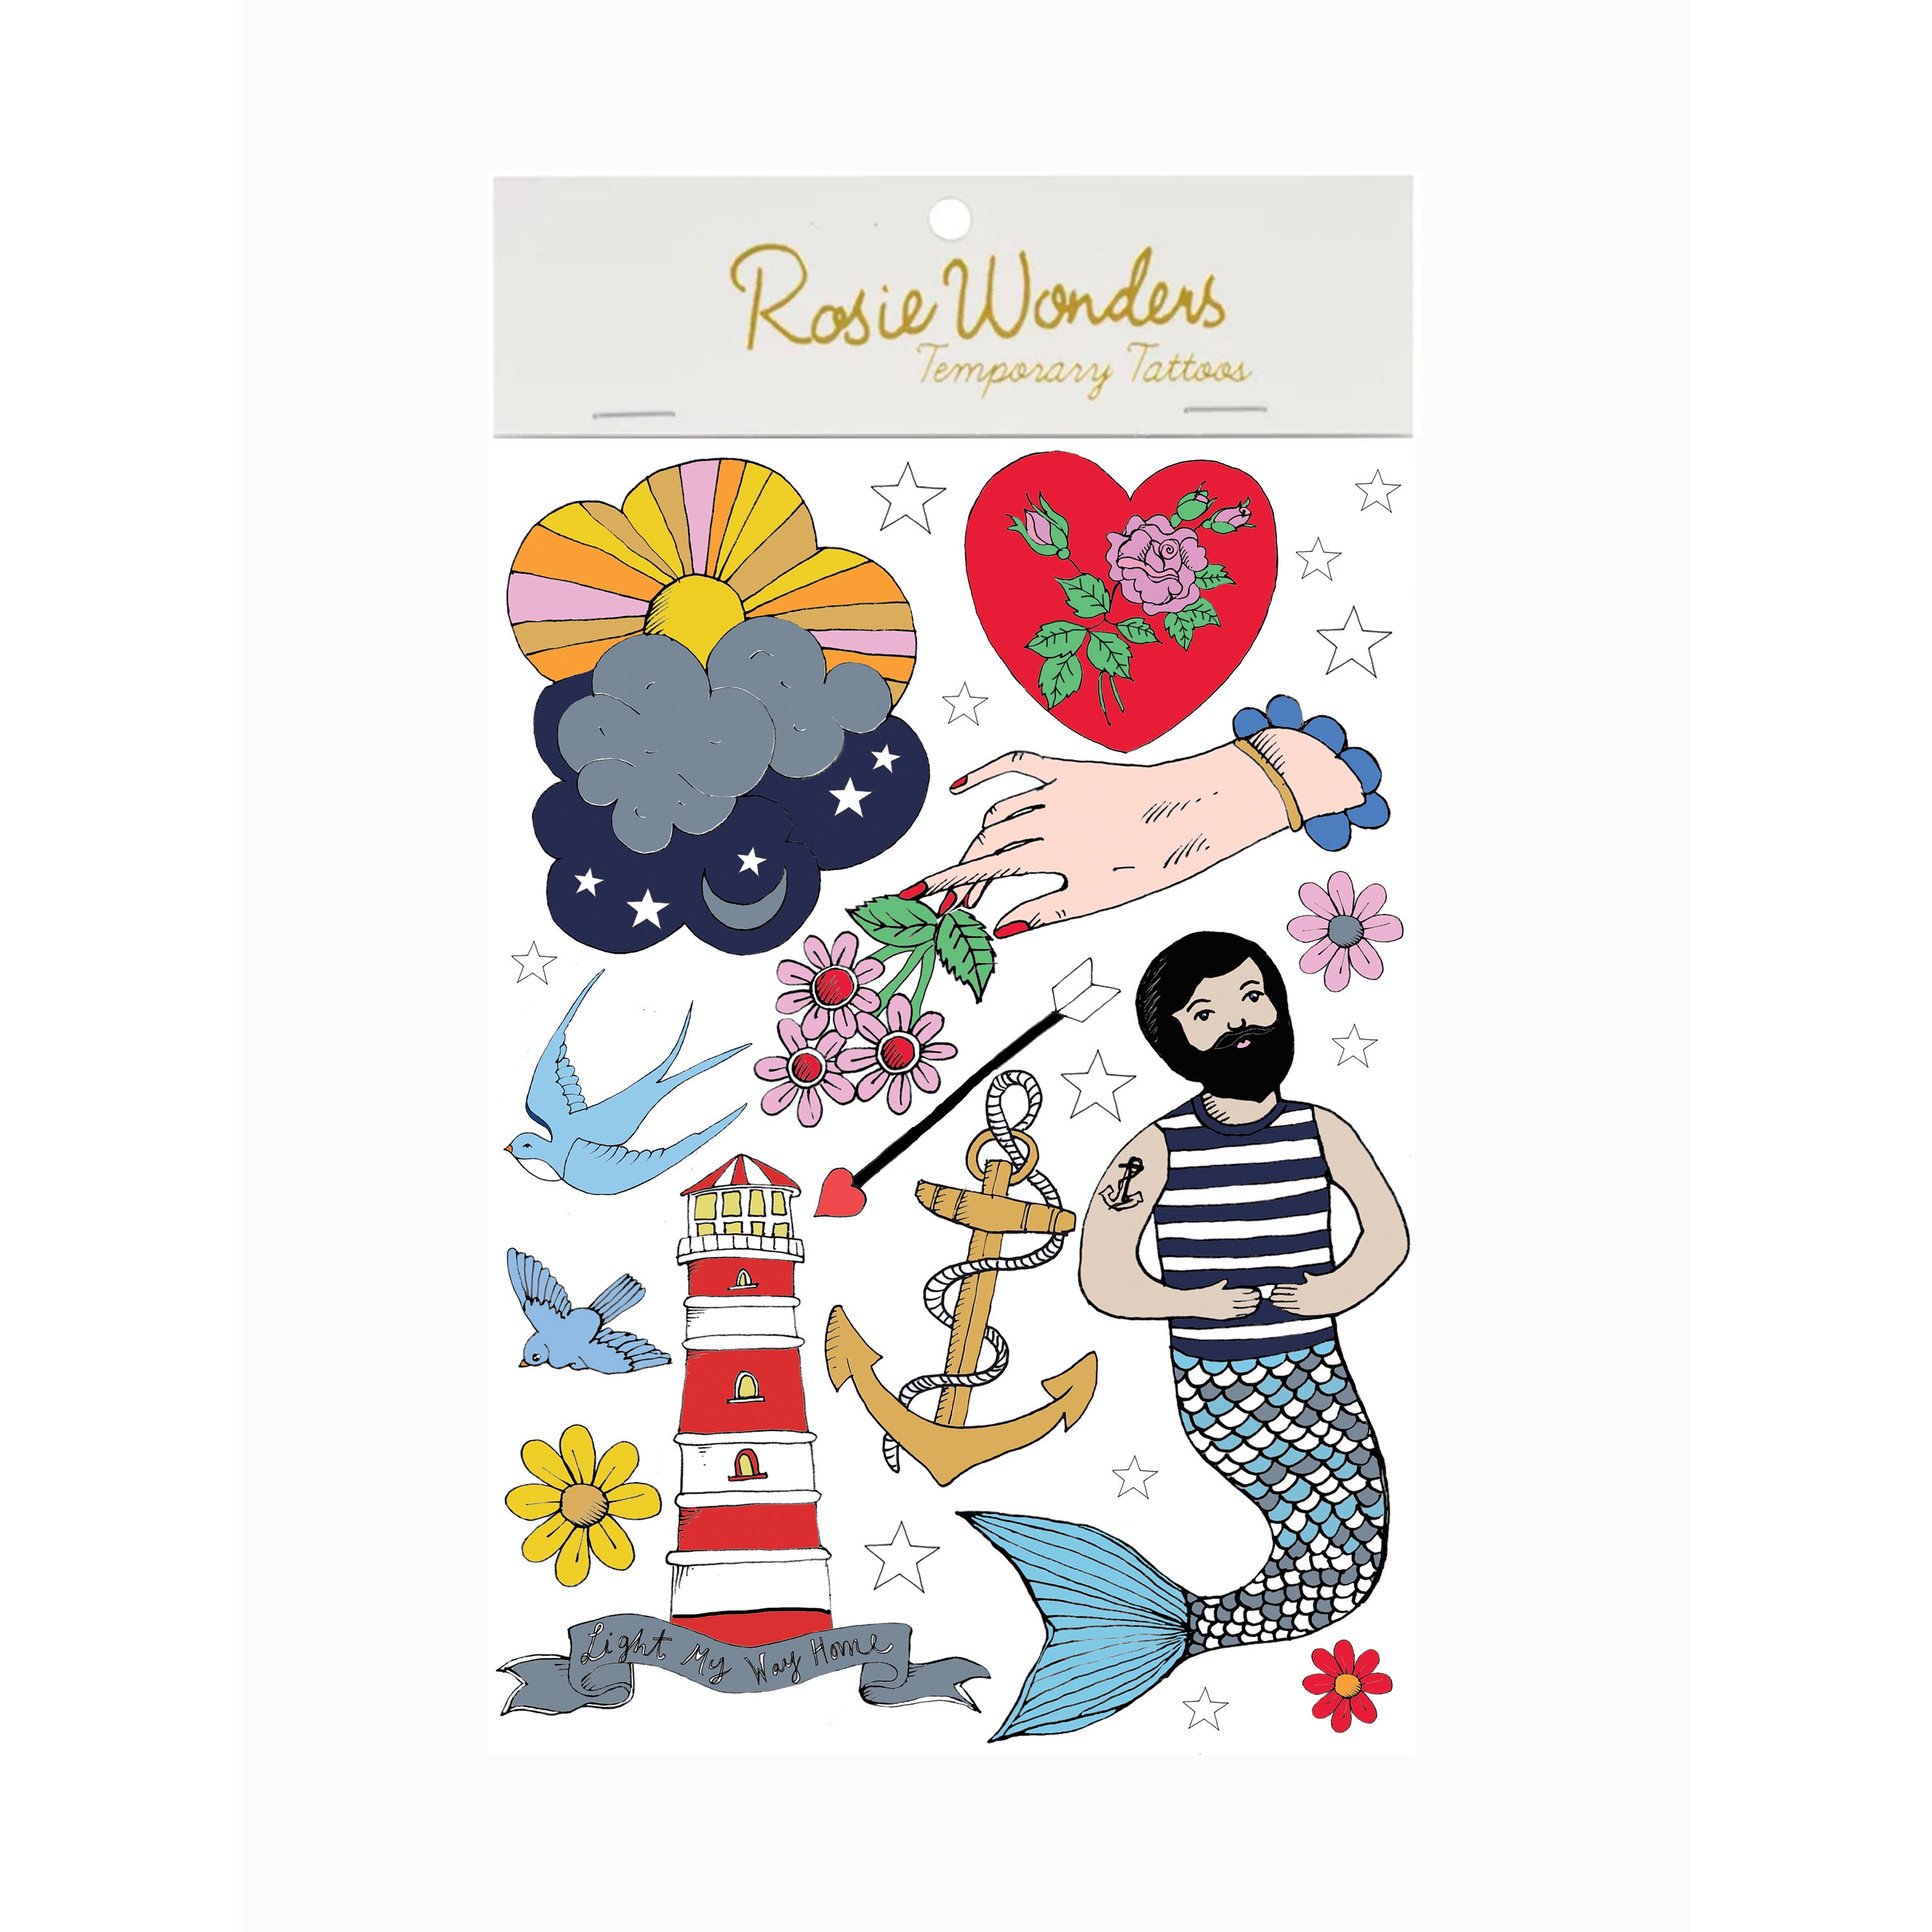 Realistic Moon Anchor Clock Temporary Tattoo Planner Stickers For Women  Colored Drawing, Waterproof, Cross ECG Design Small Size From Catherine006,  $1.82